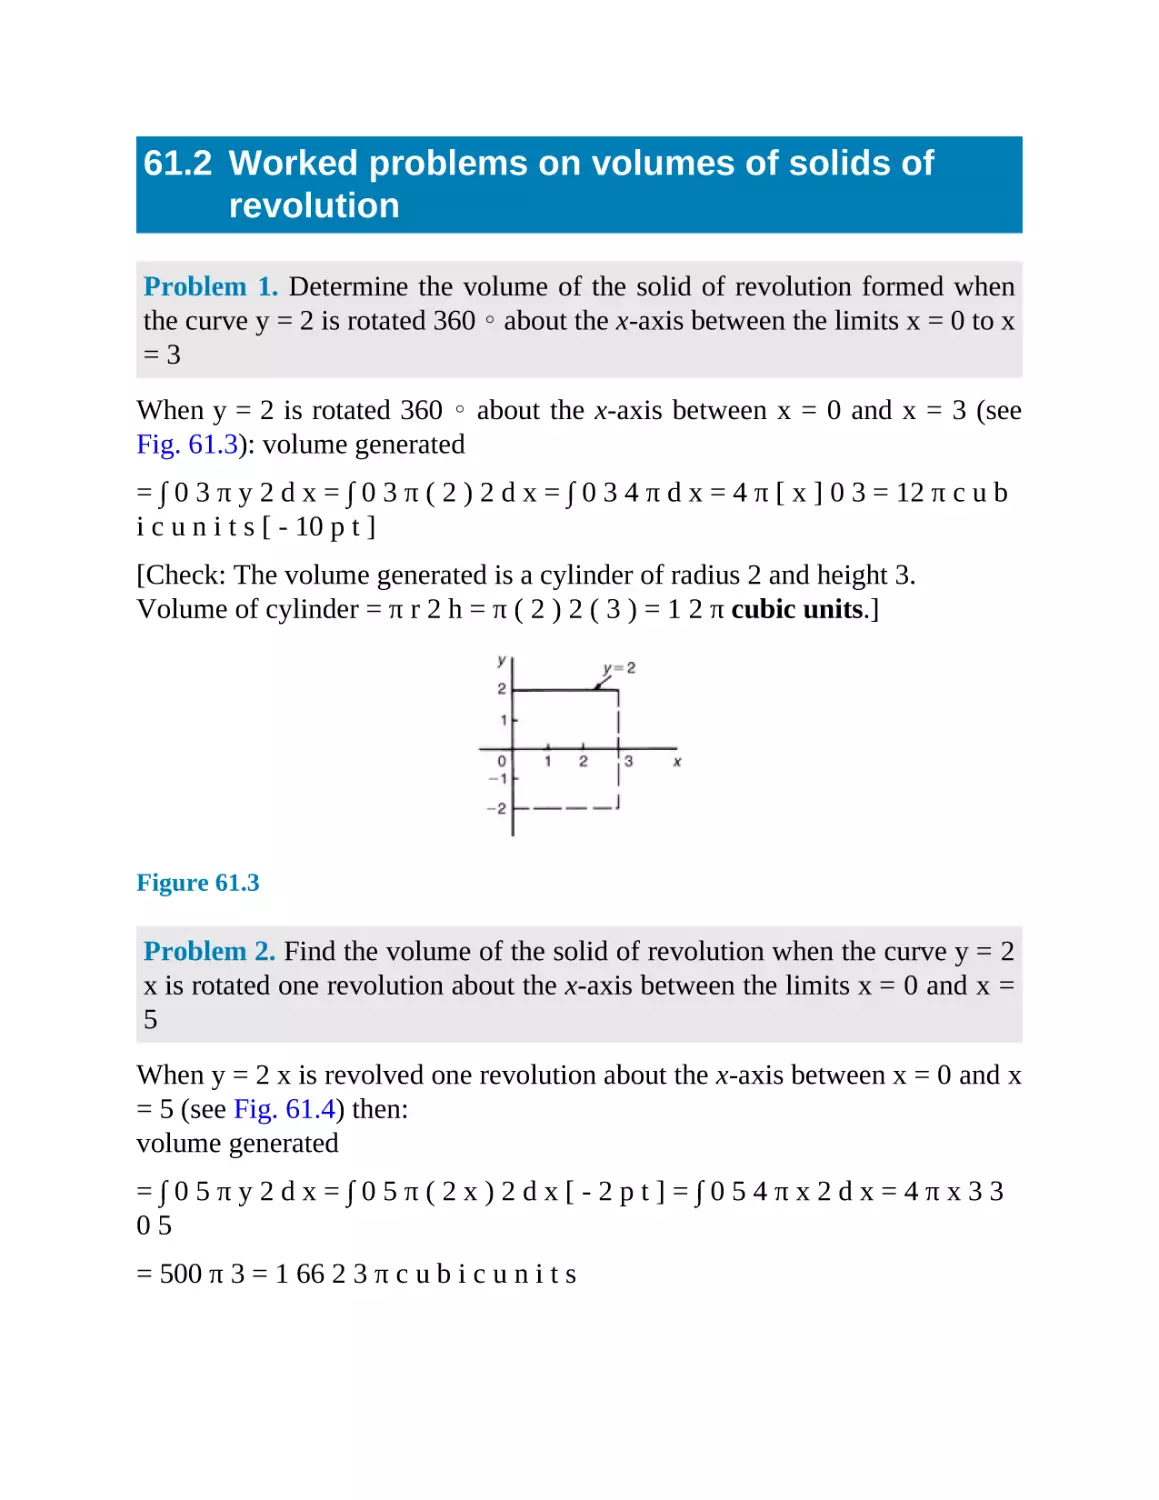 61.2 Worked problems on volumes of solids of revolution